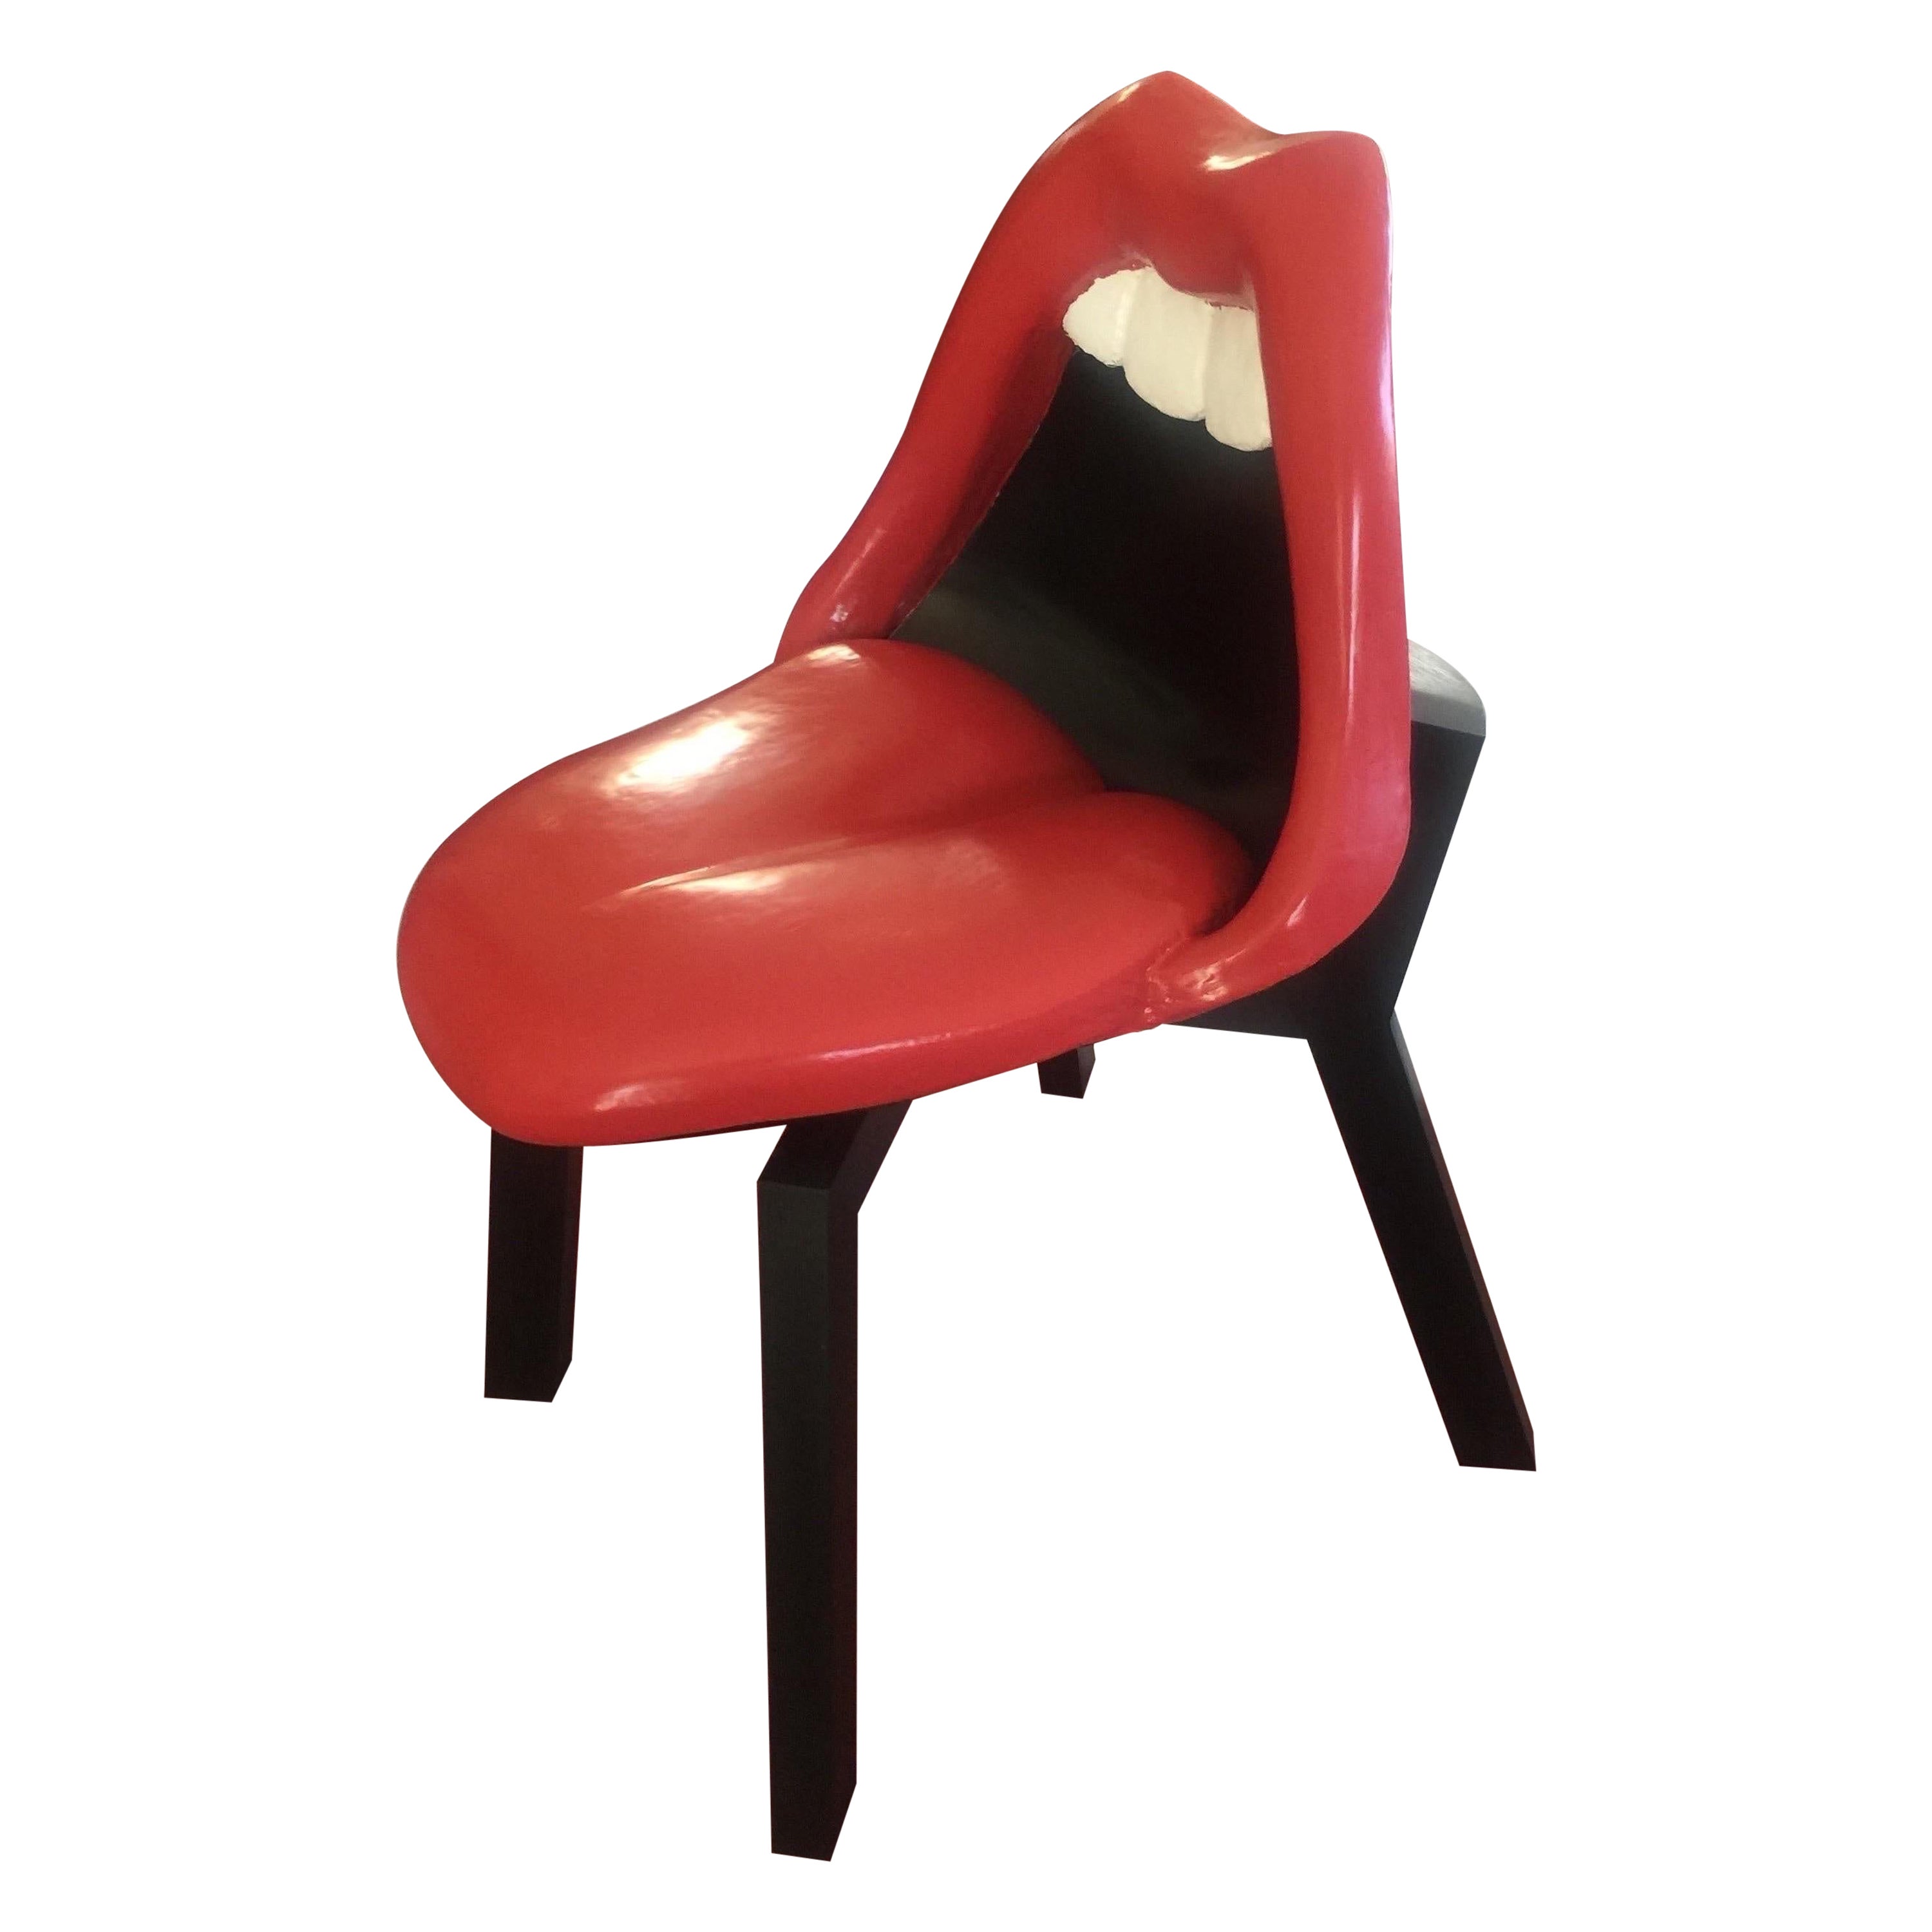 The Tongue and lip chair, Denmark 2021 For Sale